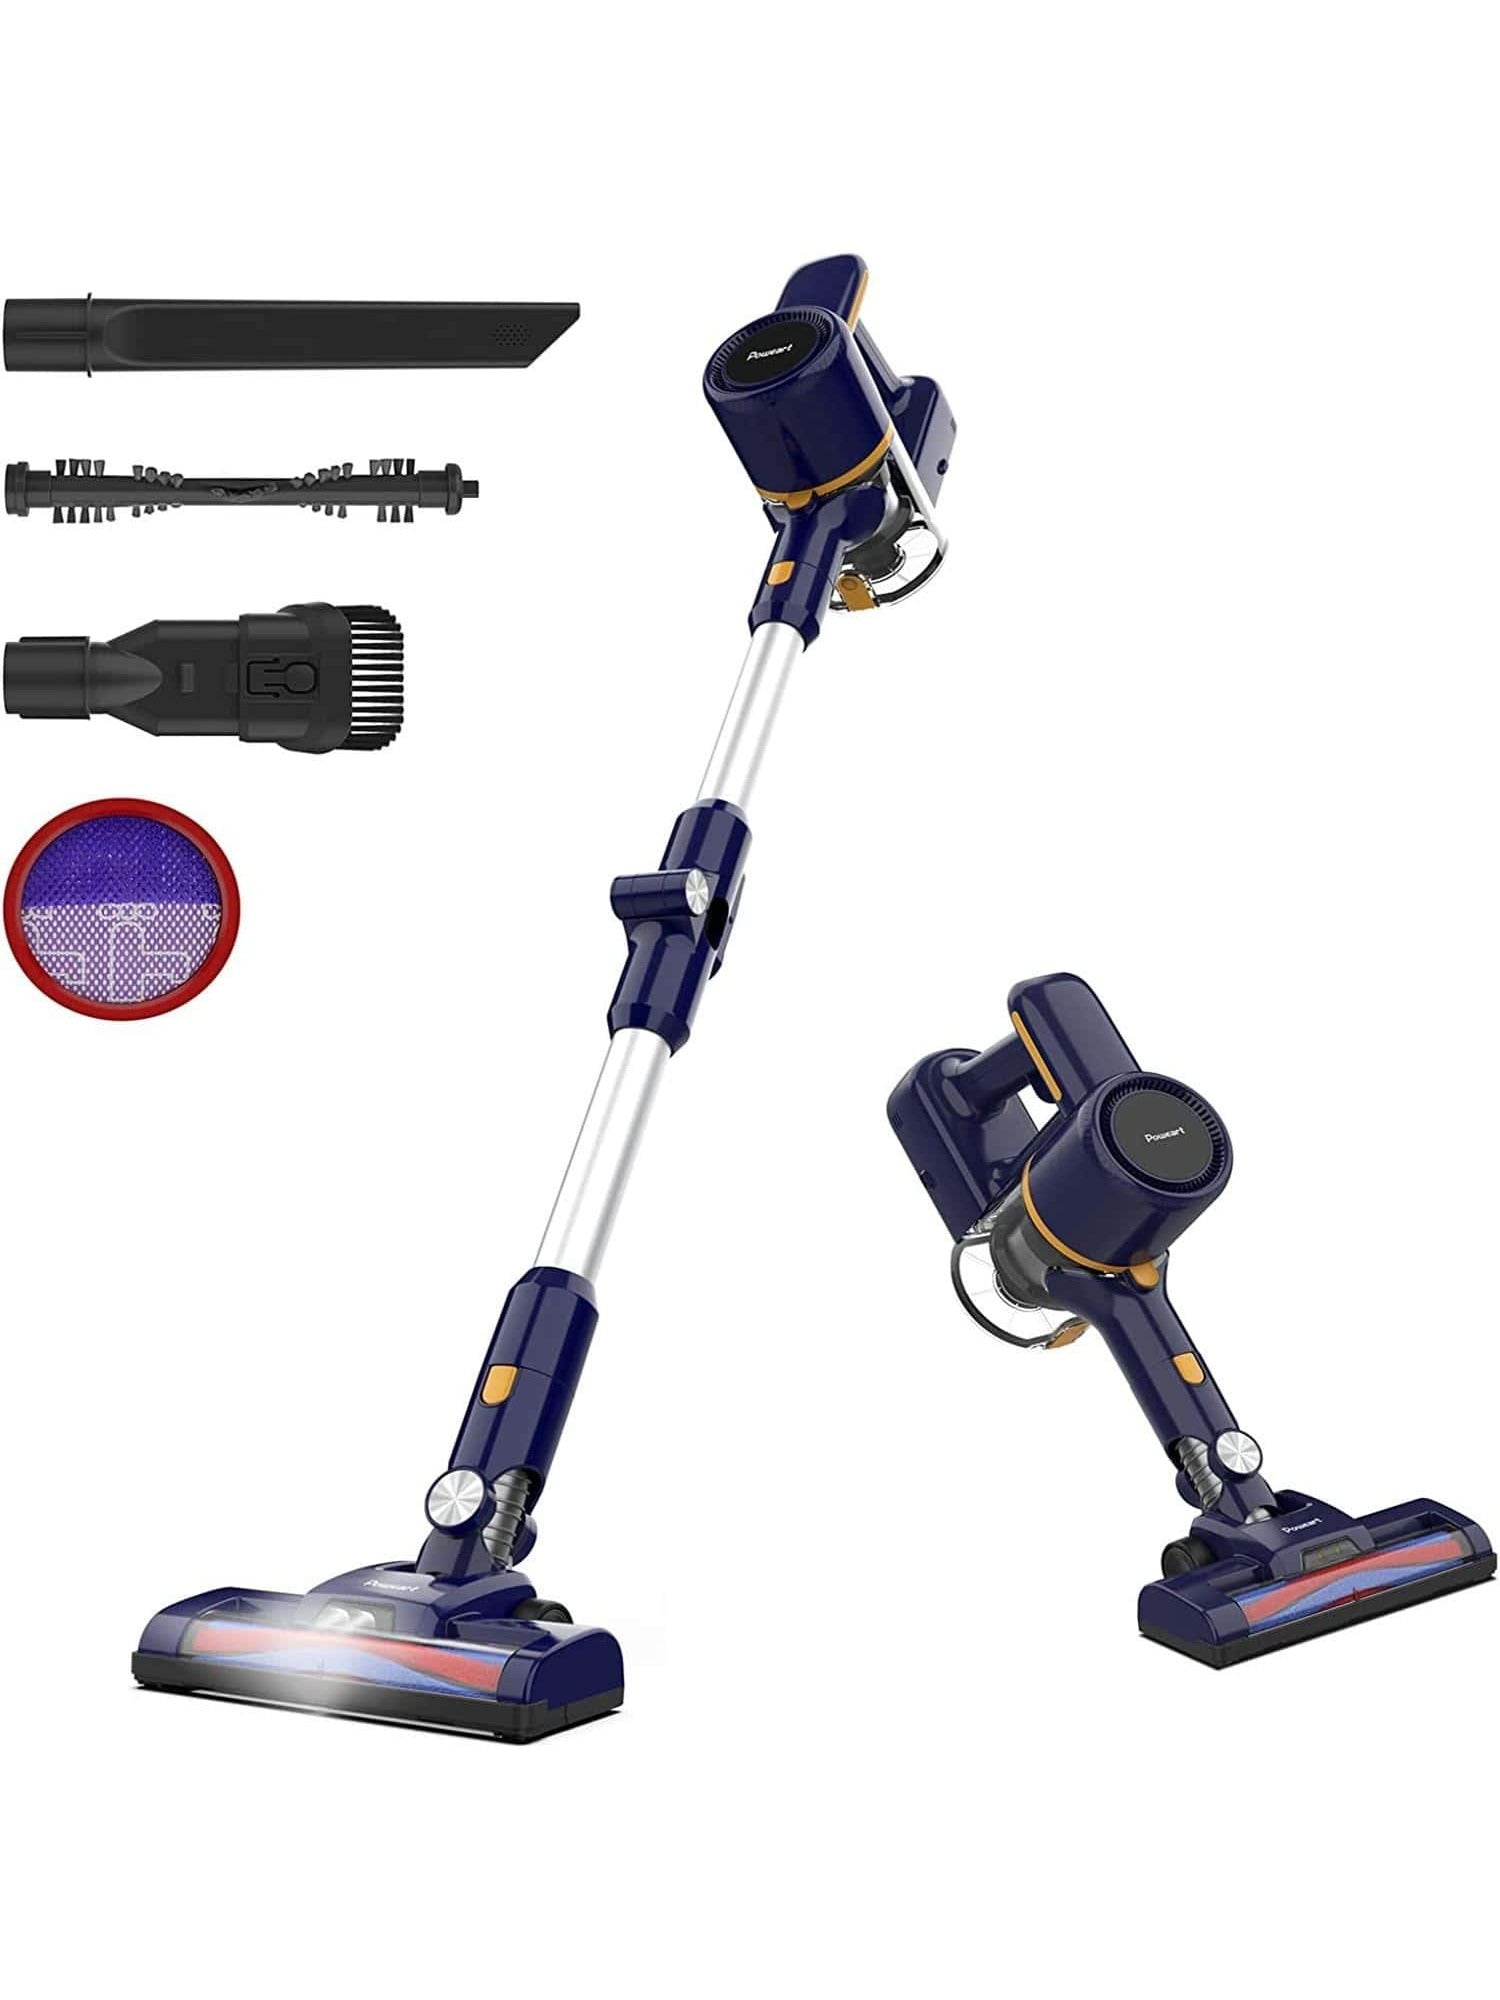 Inse Cordless Vacuum Cleaner, Lightweight Cordless Stick Vacuum with 2200mAh Battery, 6-in-1 Versatile Rechargeable Vacuum Up to 45mins Runtime, Quiet